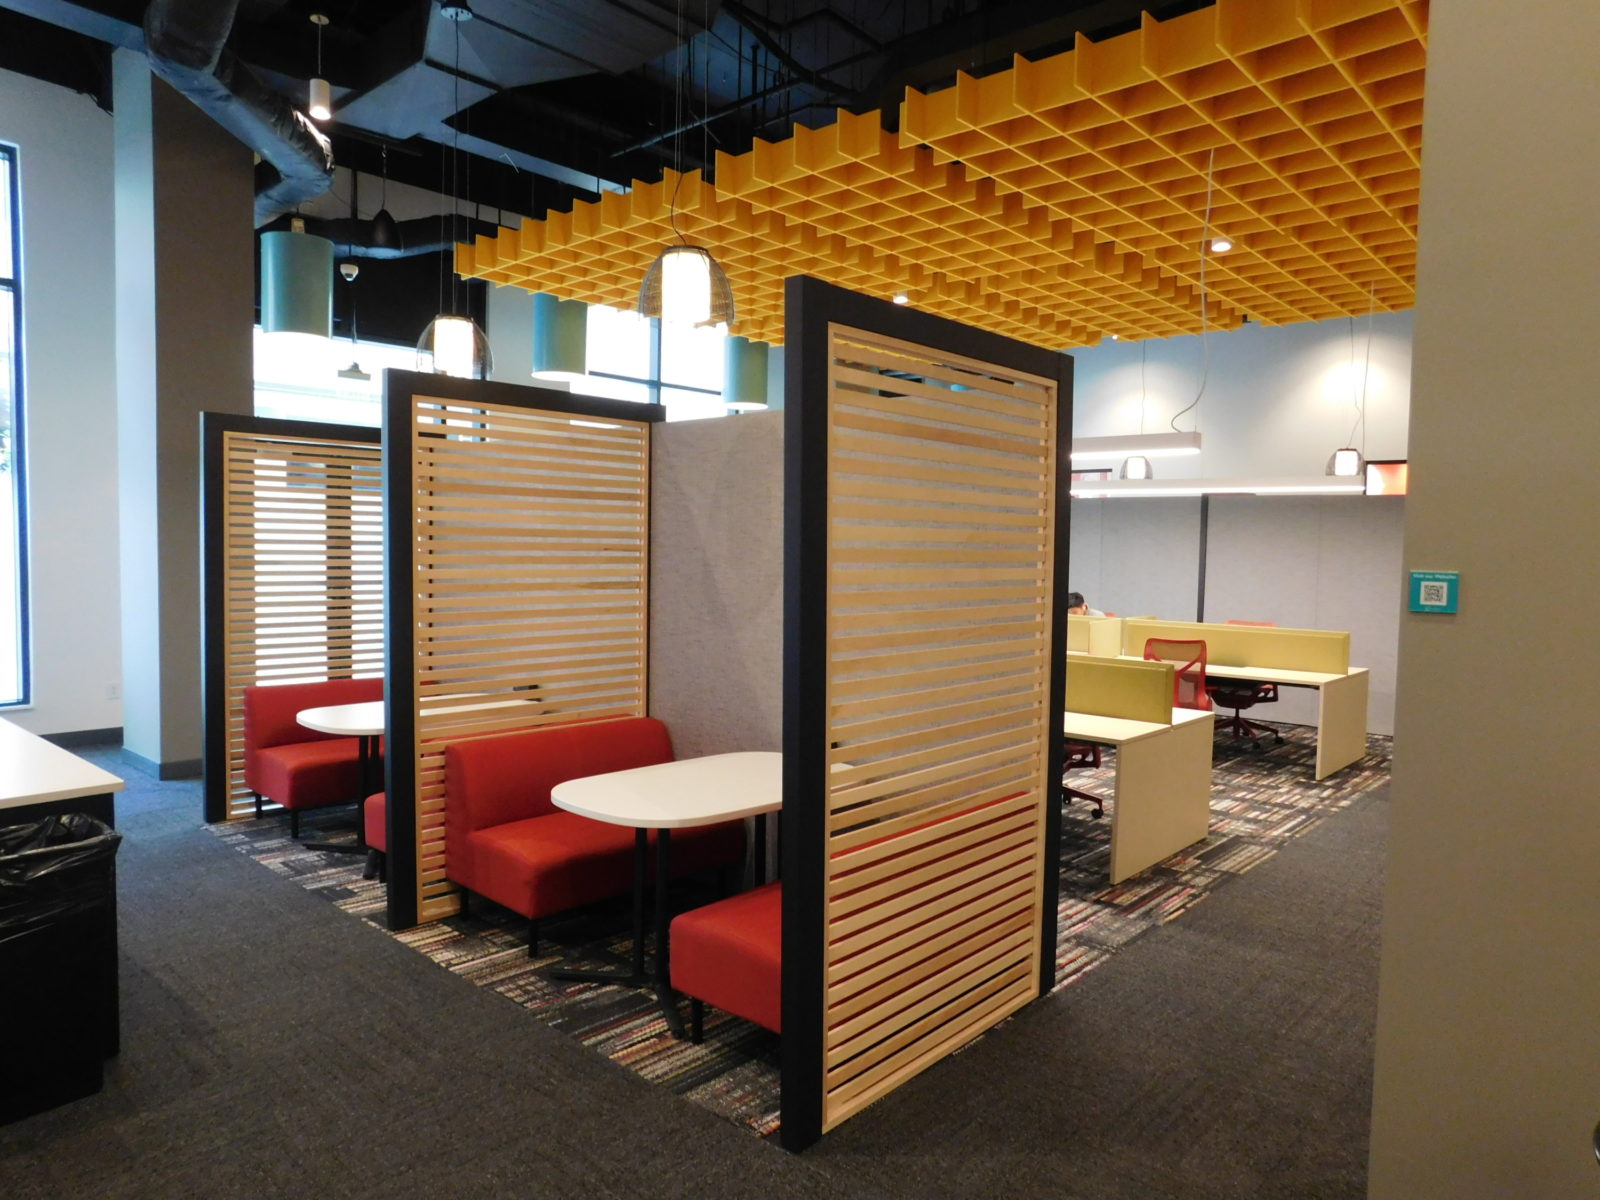 Co-working space showing 2 Herman Miller Overlay rooms with wood slat walls on the side and red booths with tables inside. Workstations in the background.